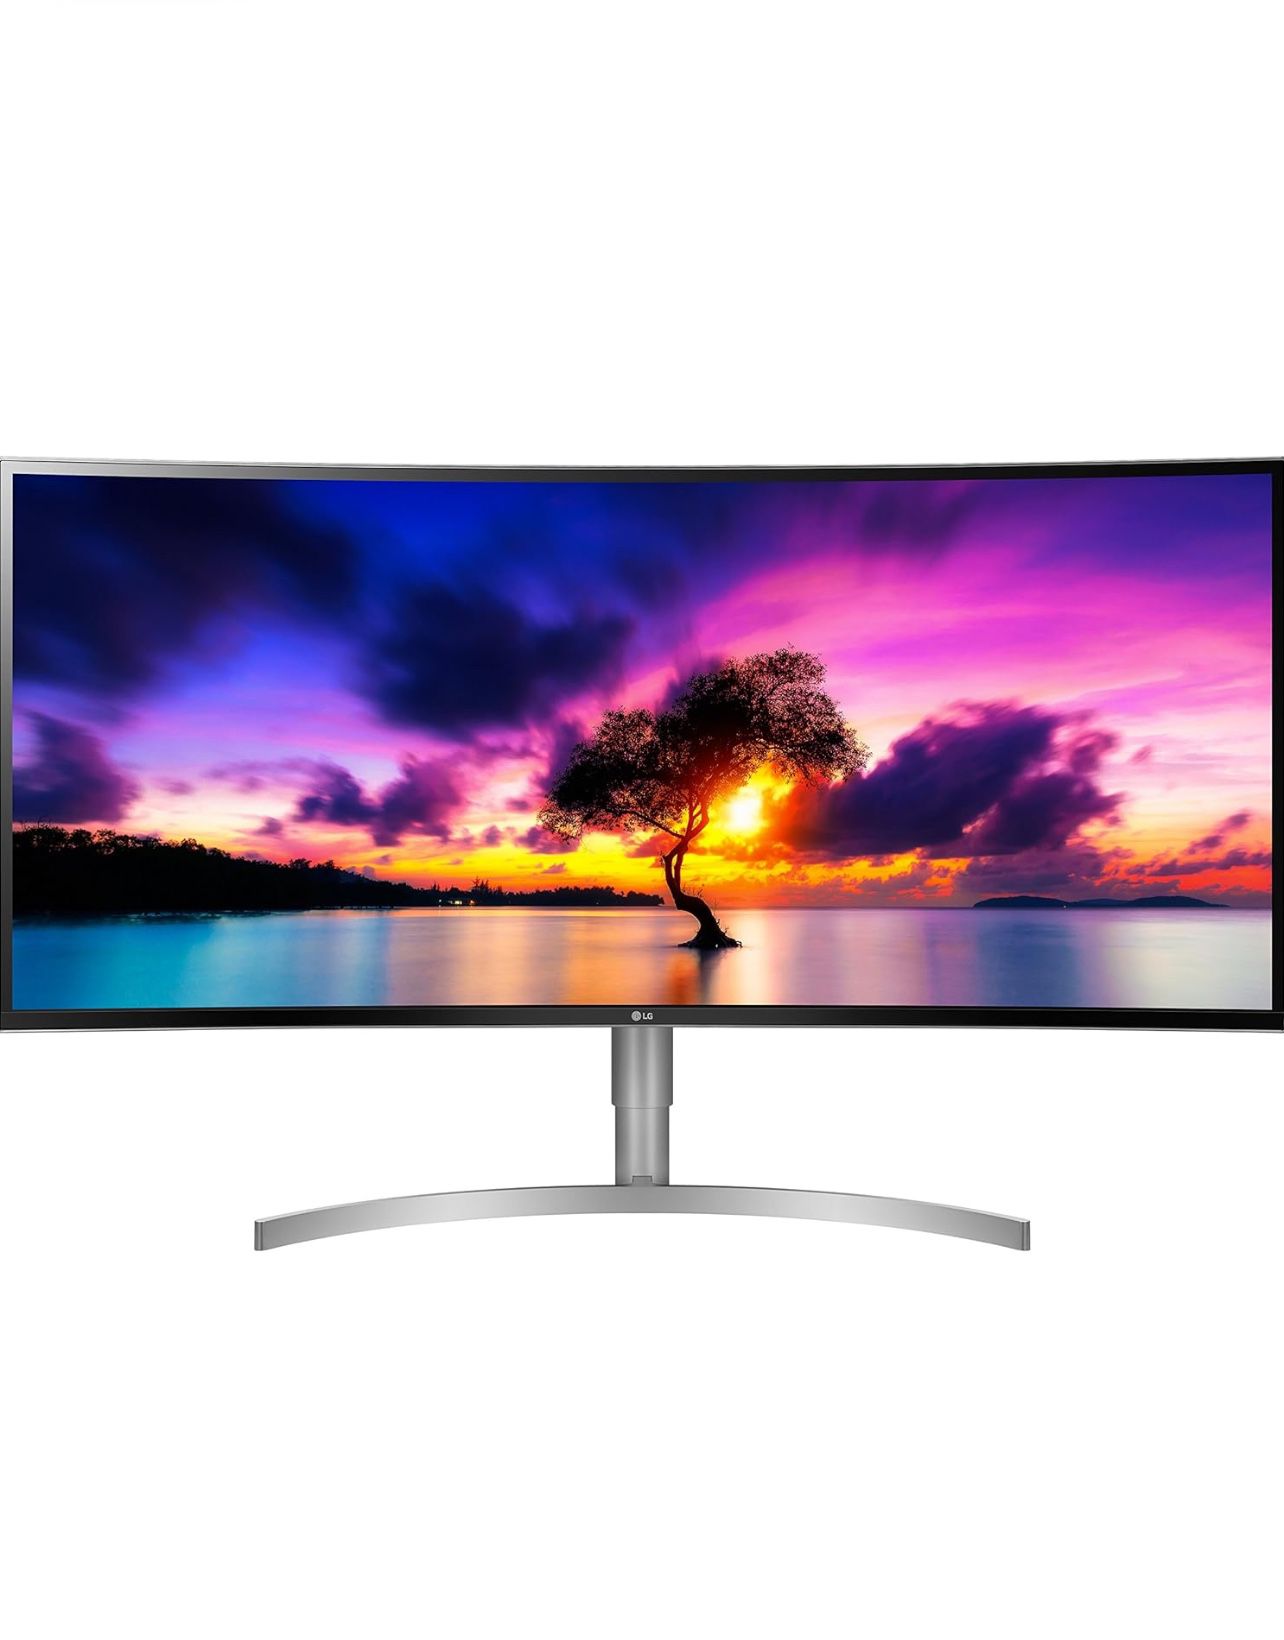 LG 38-Inch Class 21:9 Curved UltraWide WQHD+ Monitor with HDR 10